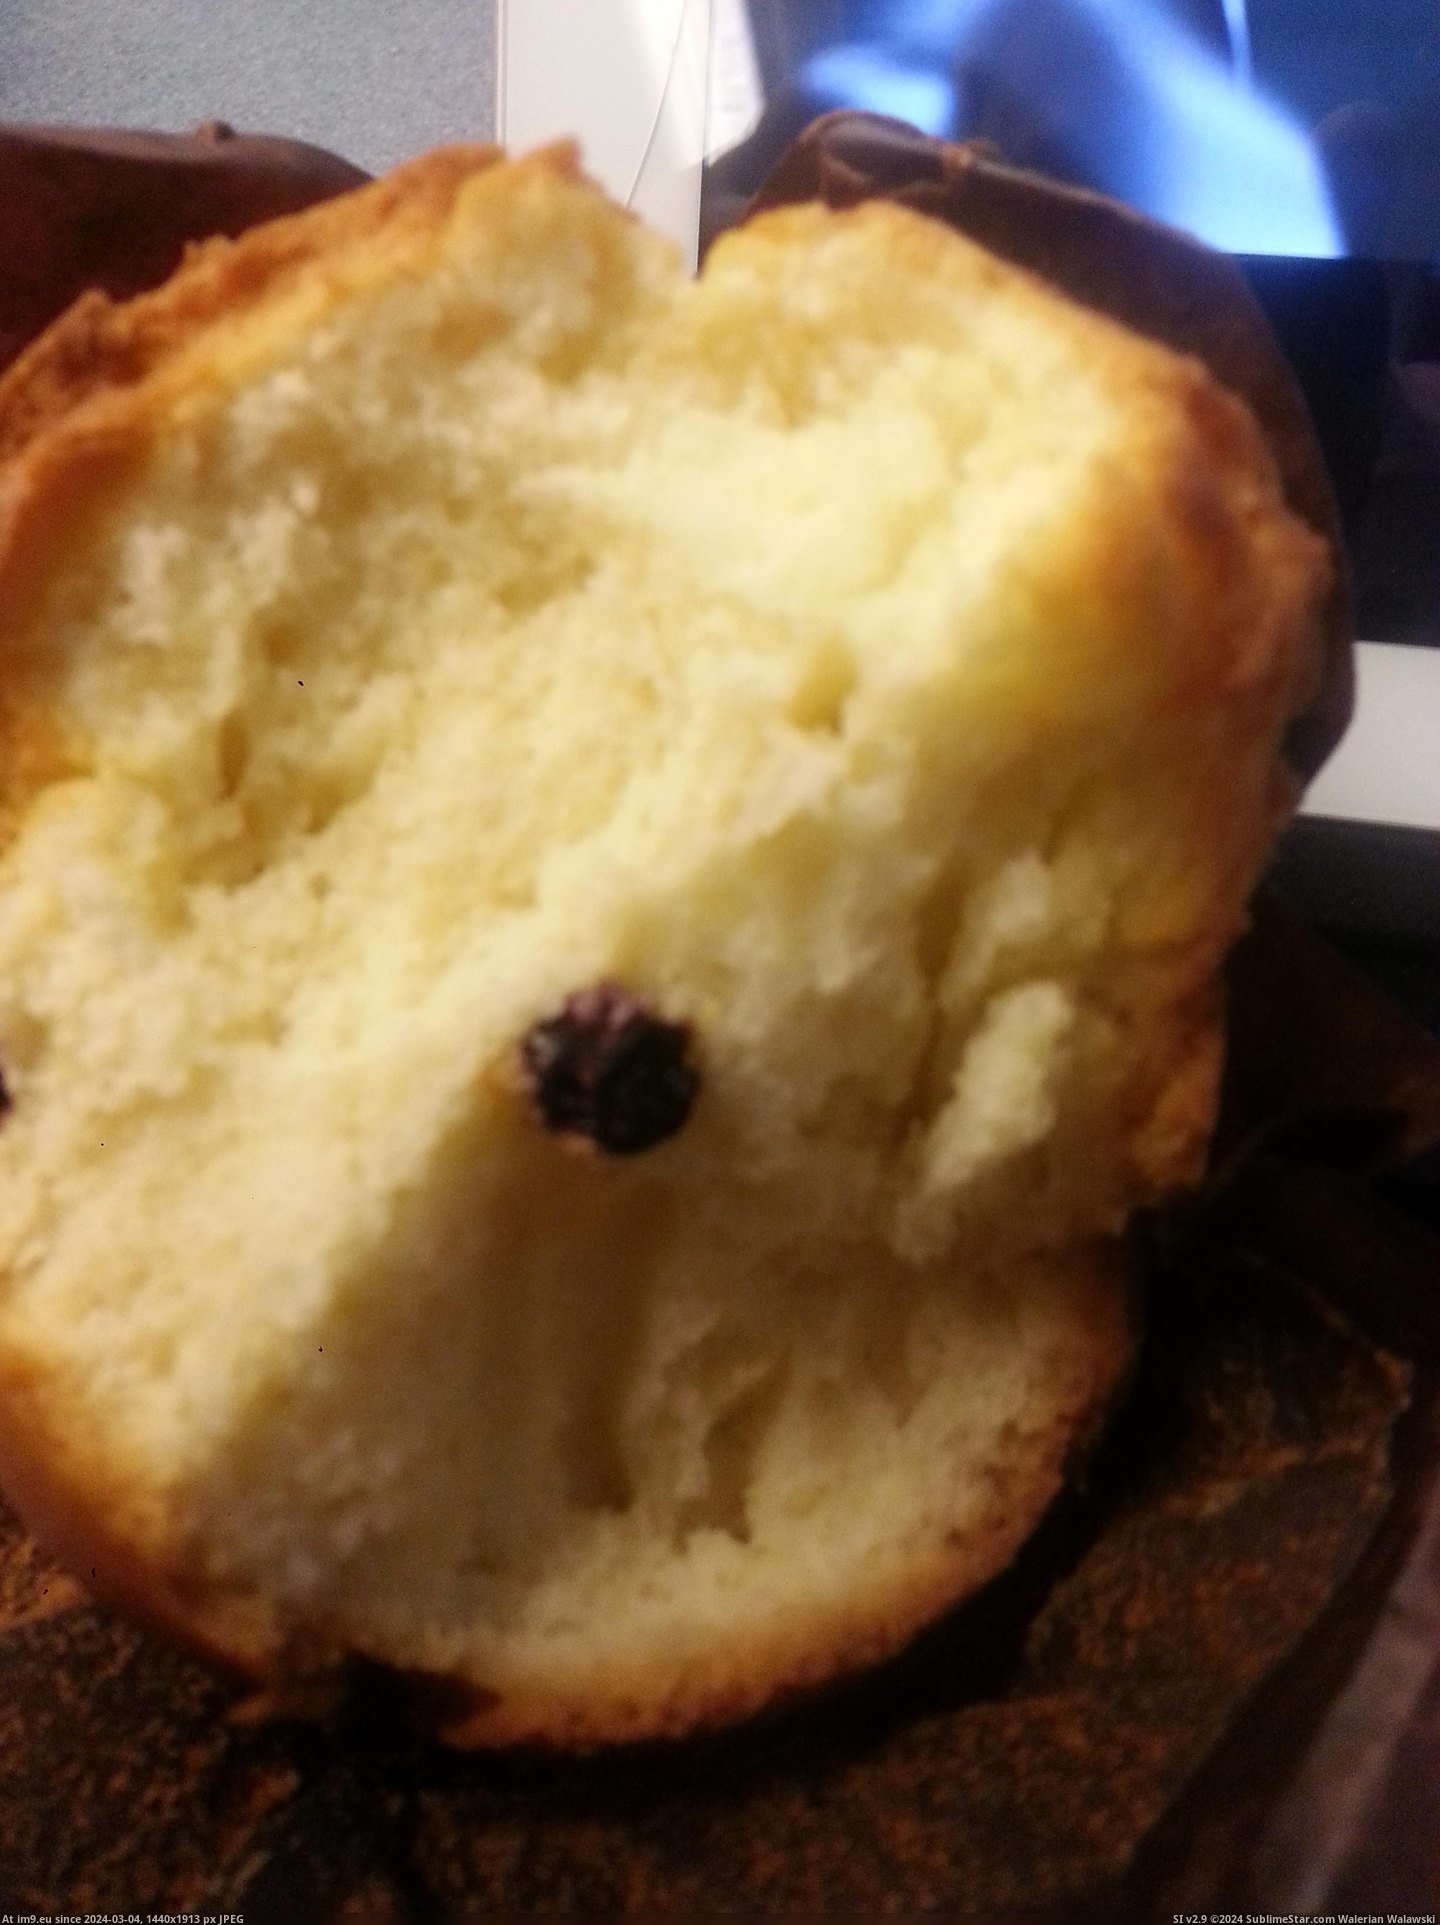 #Funny #Description #Expect #Blueberry #Muffin #Ordered #Accurate [Funny] Ordered a blueberry muffin. Got 1 blueberry. I didnt expect the description to be so accurate. Pic. (Image of album My r/FUNNY favs))